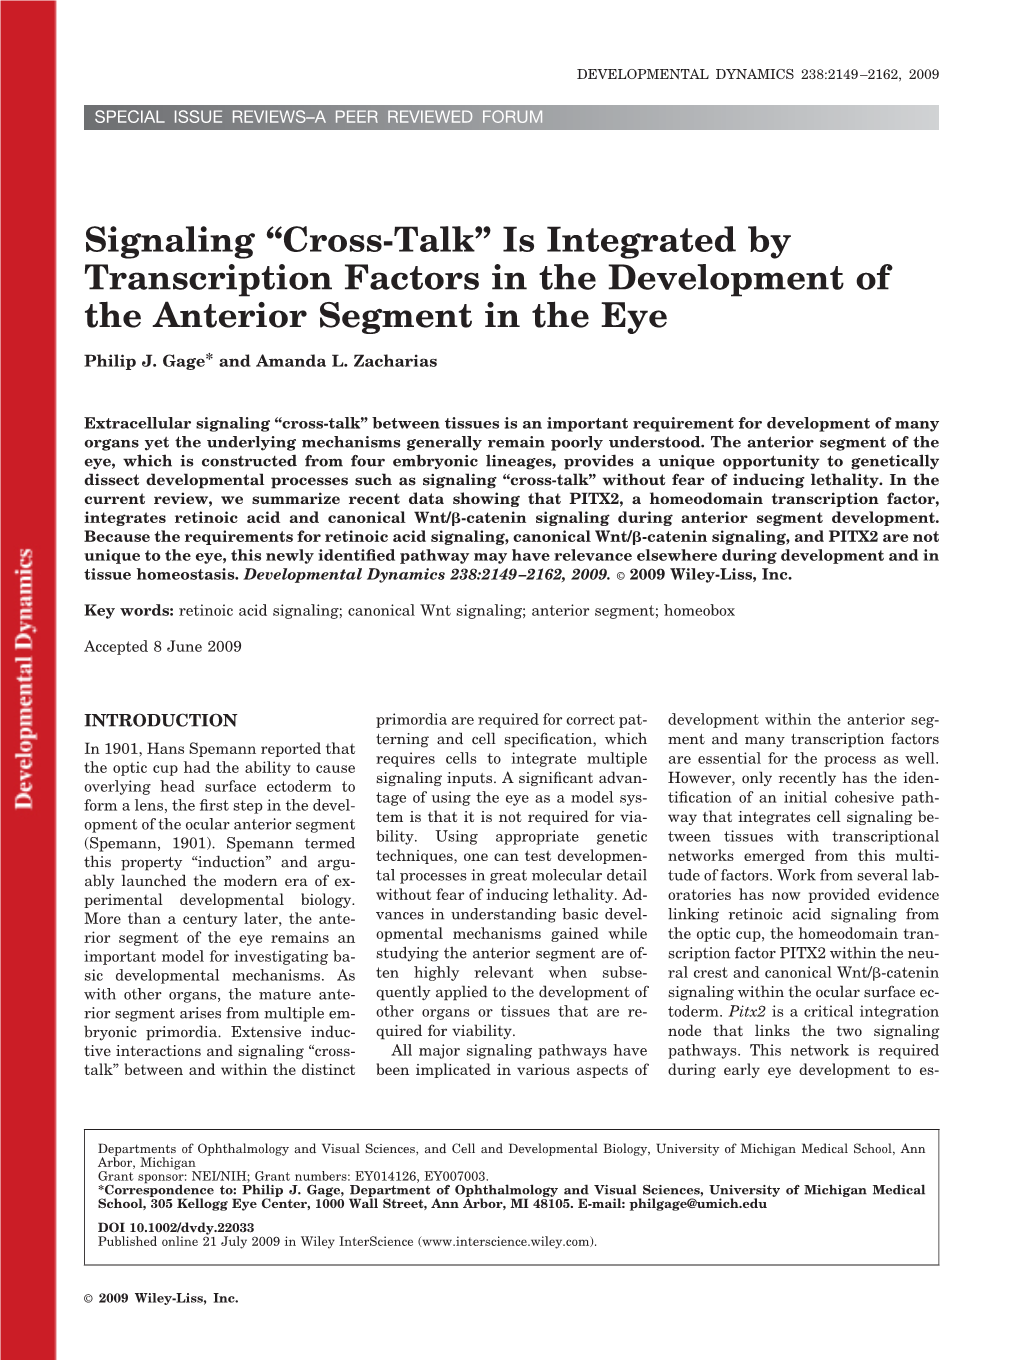 Signaling “Cross-Talk” Is Integrated by Transcription Factors in the Development of the Anterior Segment in the Eye